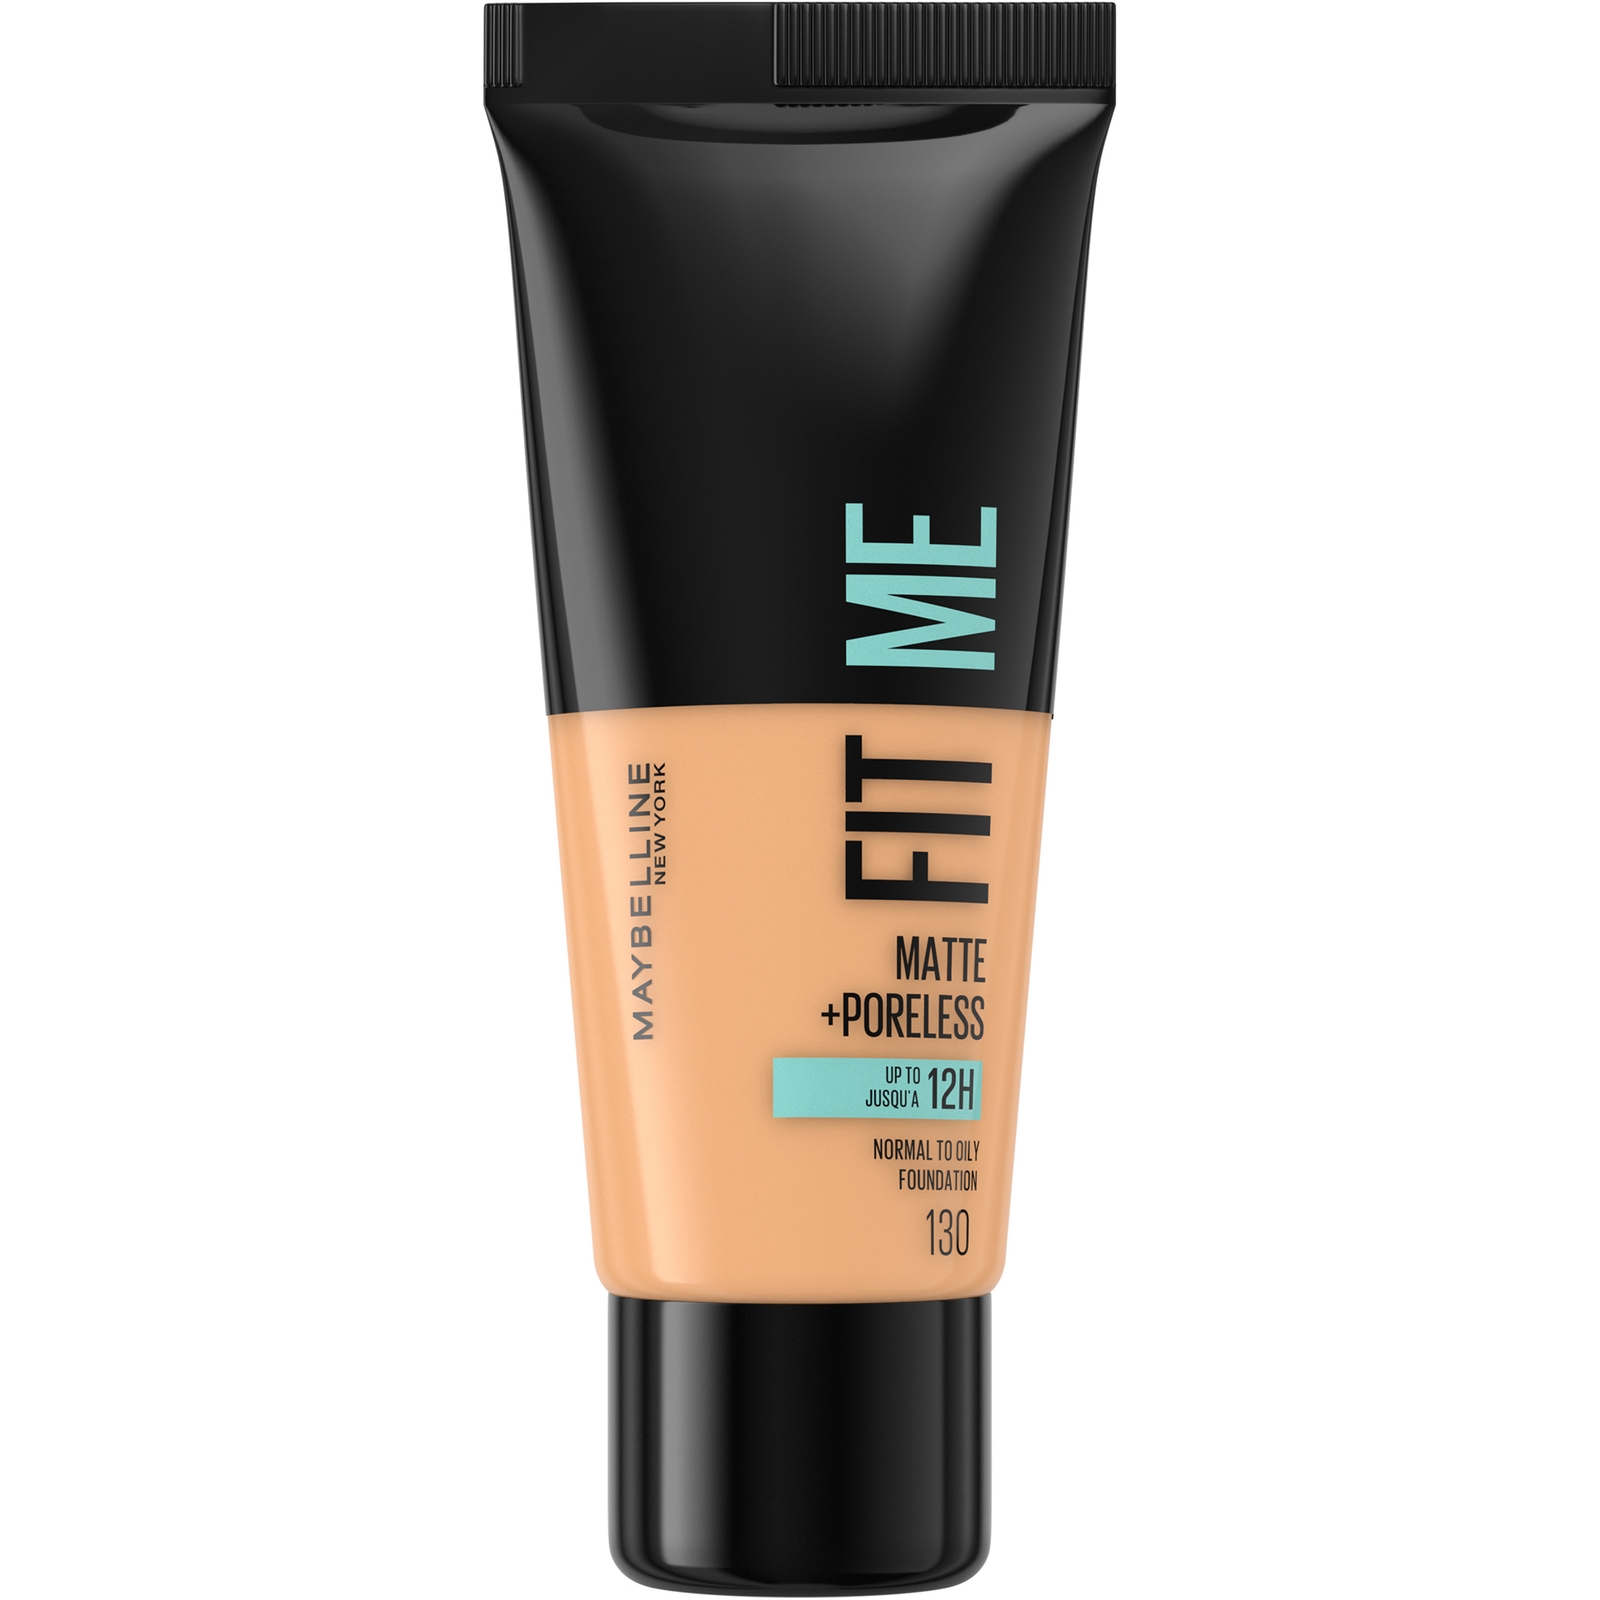 Maybelline Fit Me! Matte and Poreless Foundation 30ml (Various Shades) - 130 Buff Beige